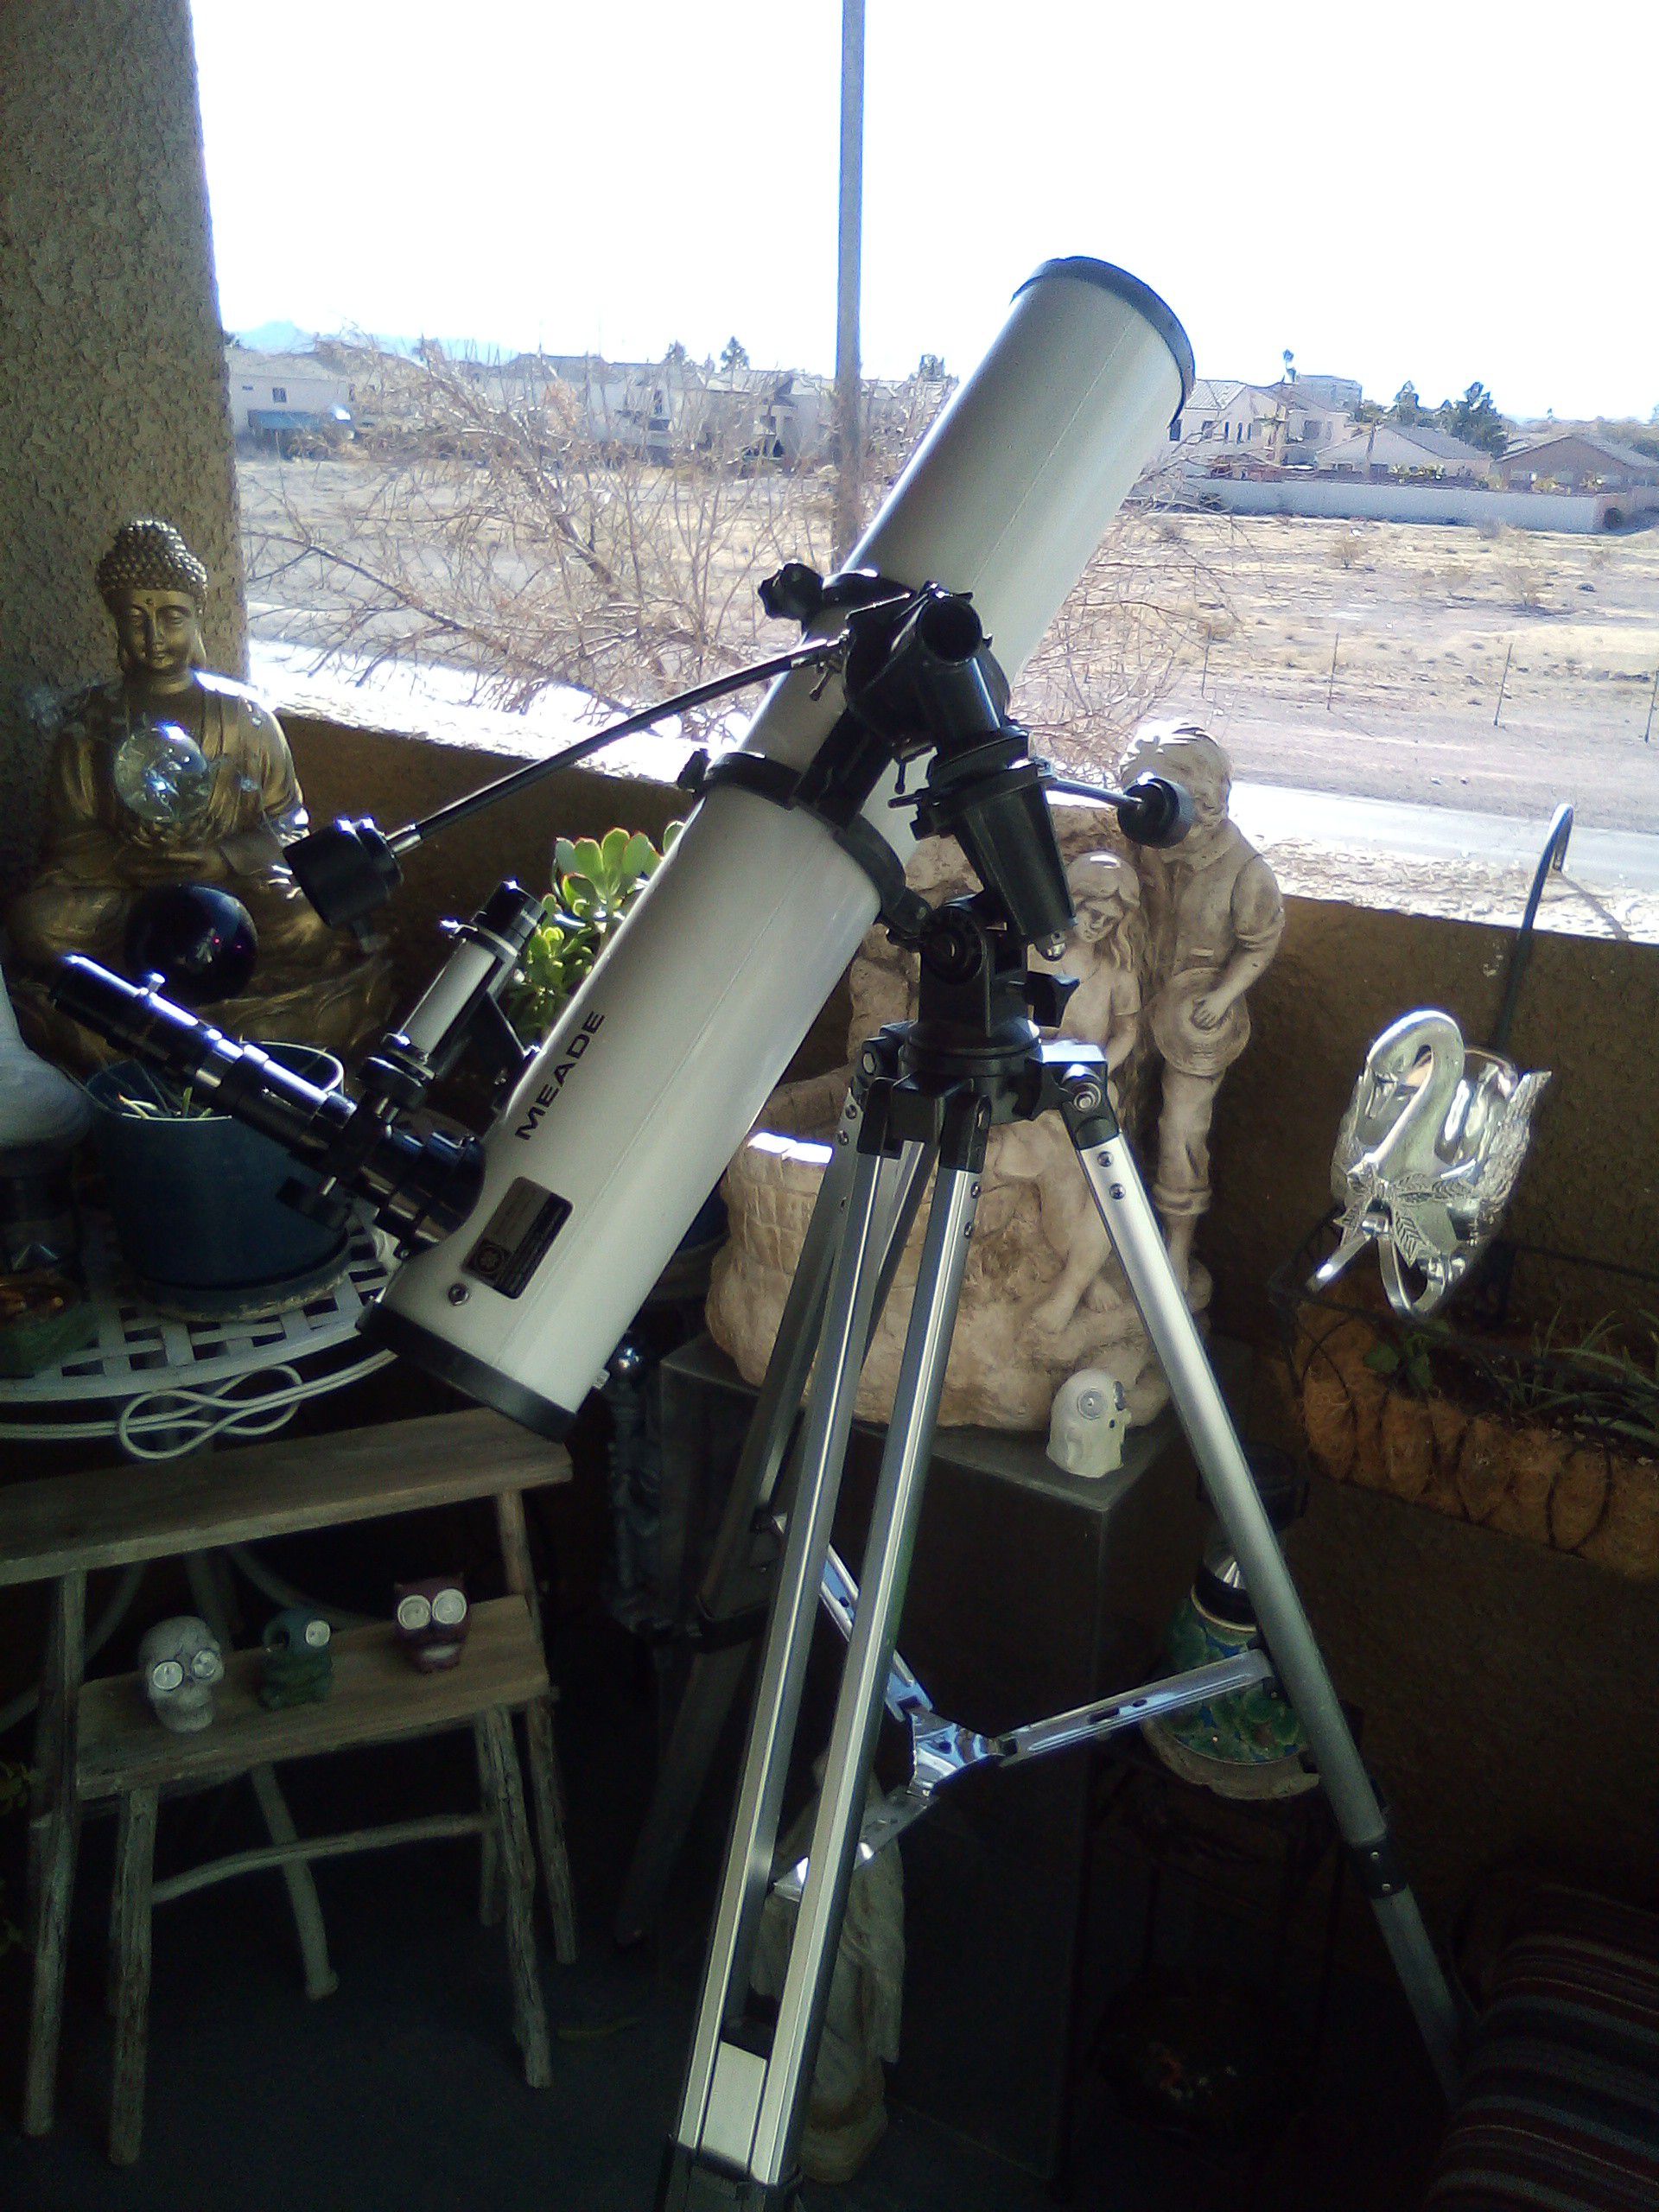 Meade telescope 4500 model (as is used as a prop)